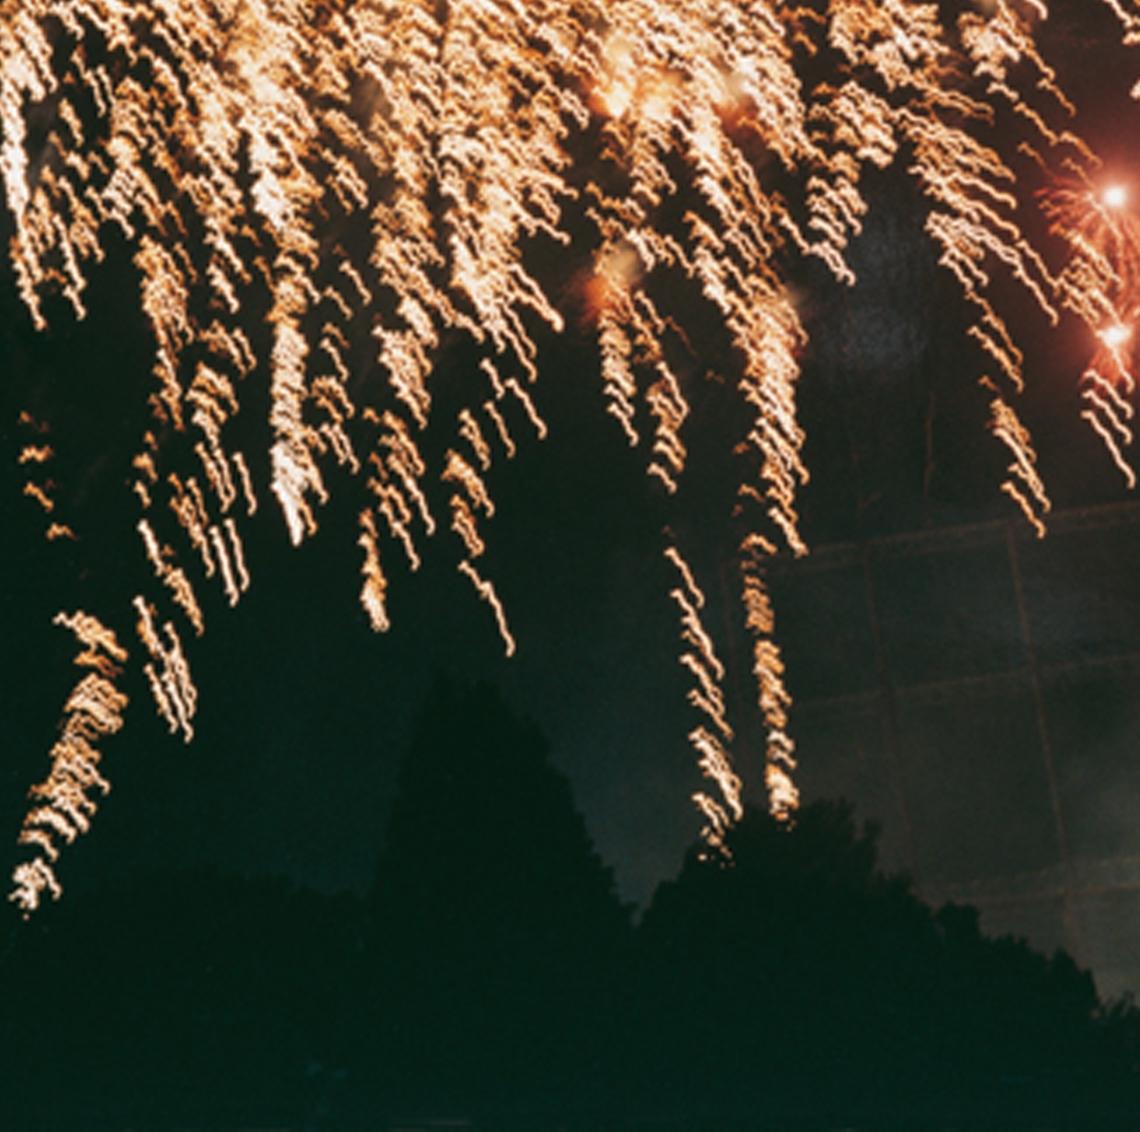 RINKO KAWAUCHI (*1972, Japan)
Untitled, from the series 'Hanabi'
2001
C–type print
Sheet 25.4 x 20.3 cm (10 x 8 in.)
Edition of 6; Ed. no. 4/6 
framed

Reminiscent of Japanese photography of the 1960s Rinko Kawauchi’s work is the search for the